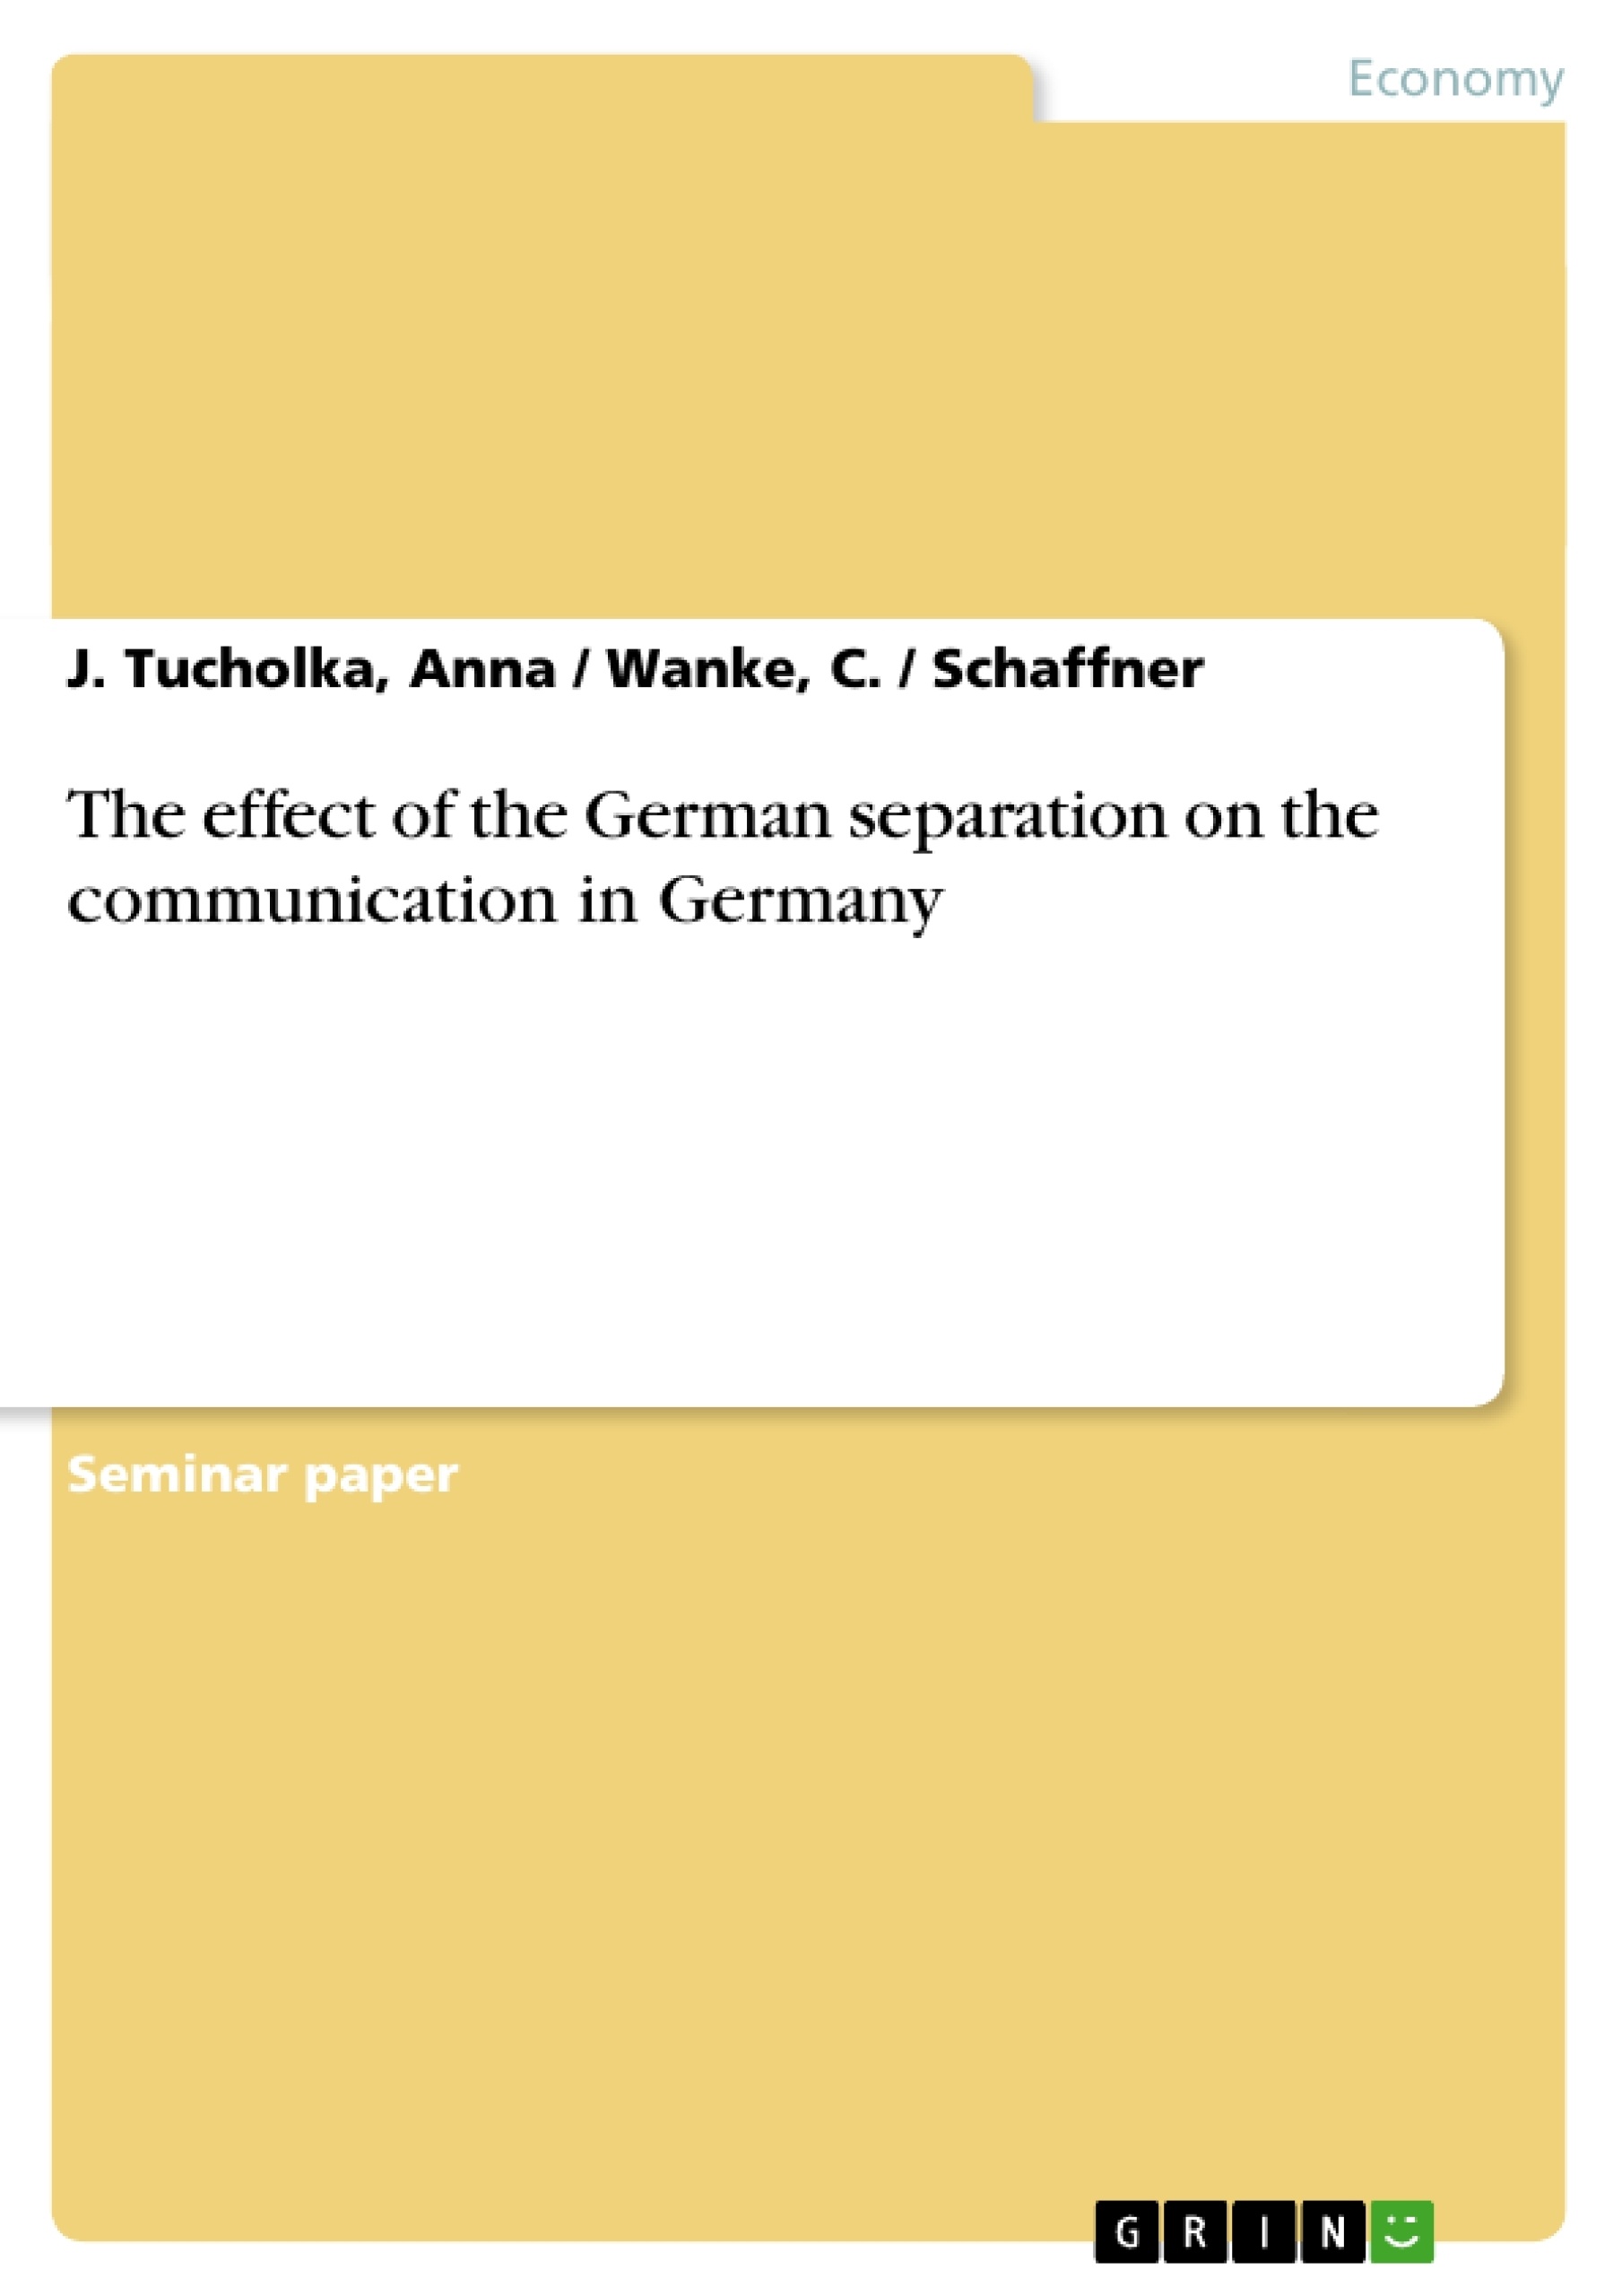 Title: The effect of the German separation on the communication in Germany